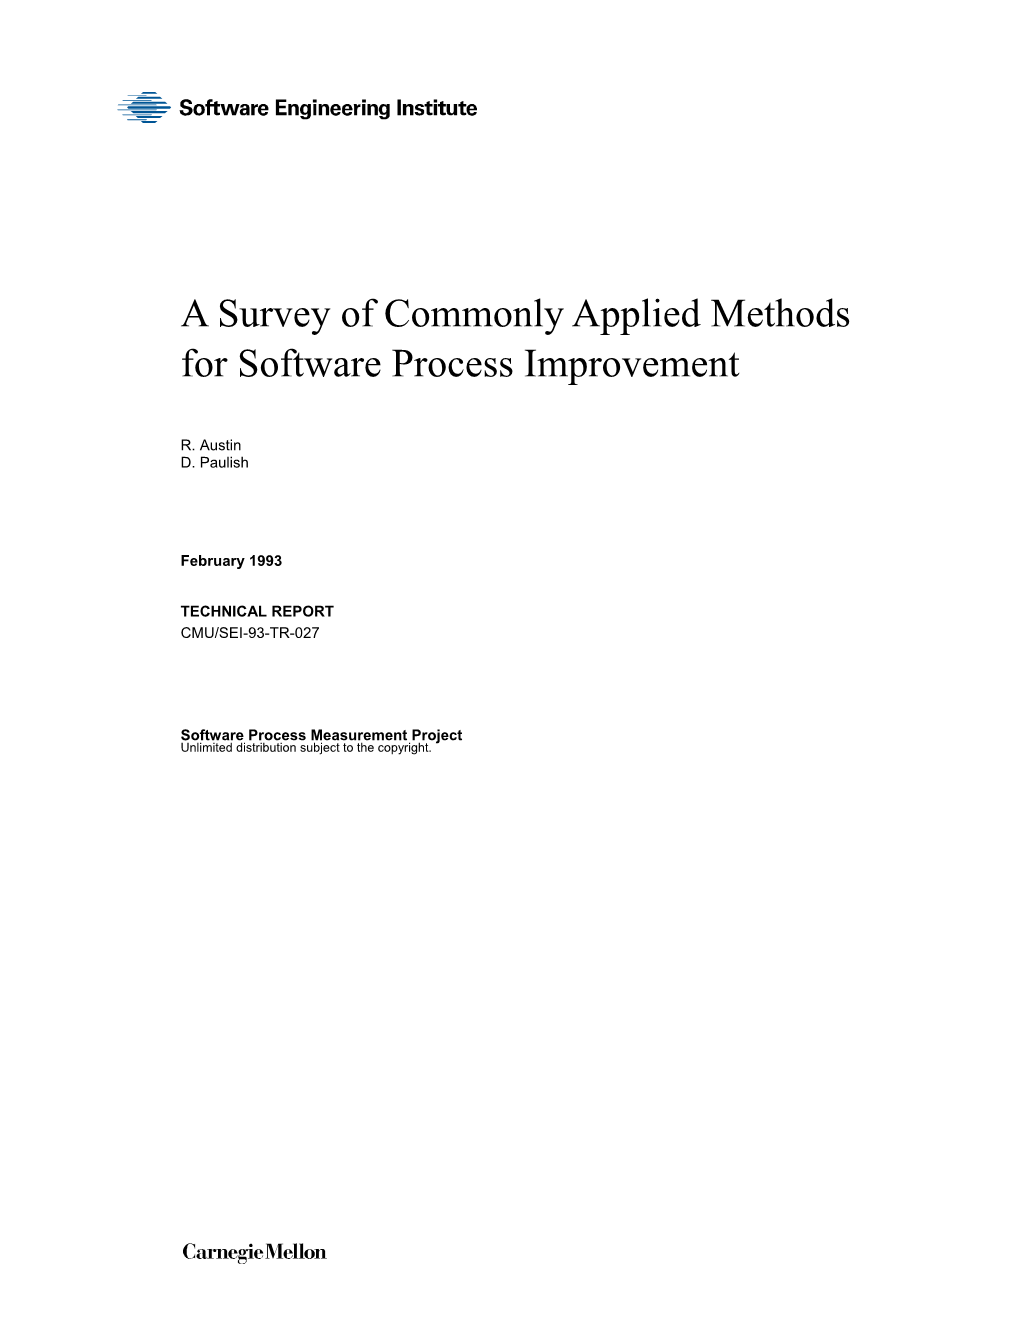 A Survey of Commonly Applied Methods for Software Process Improvement